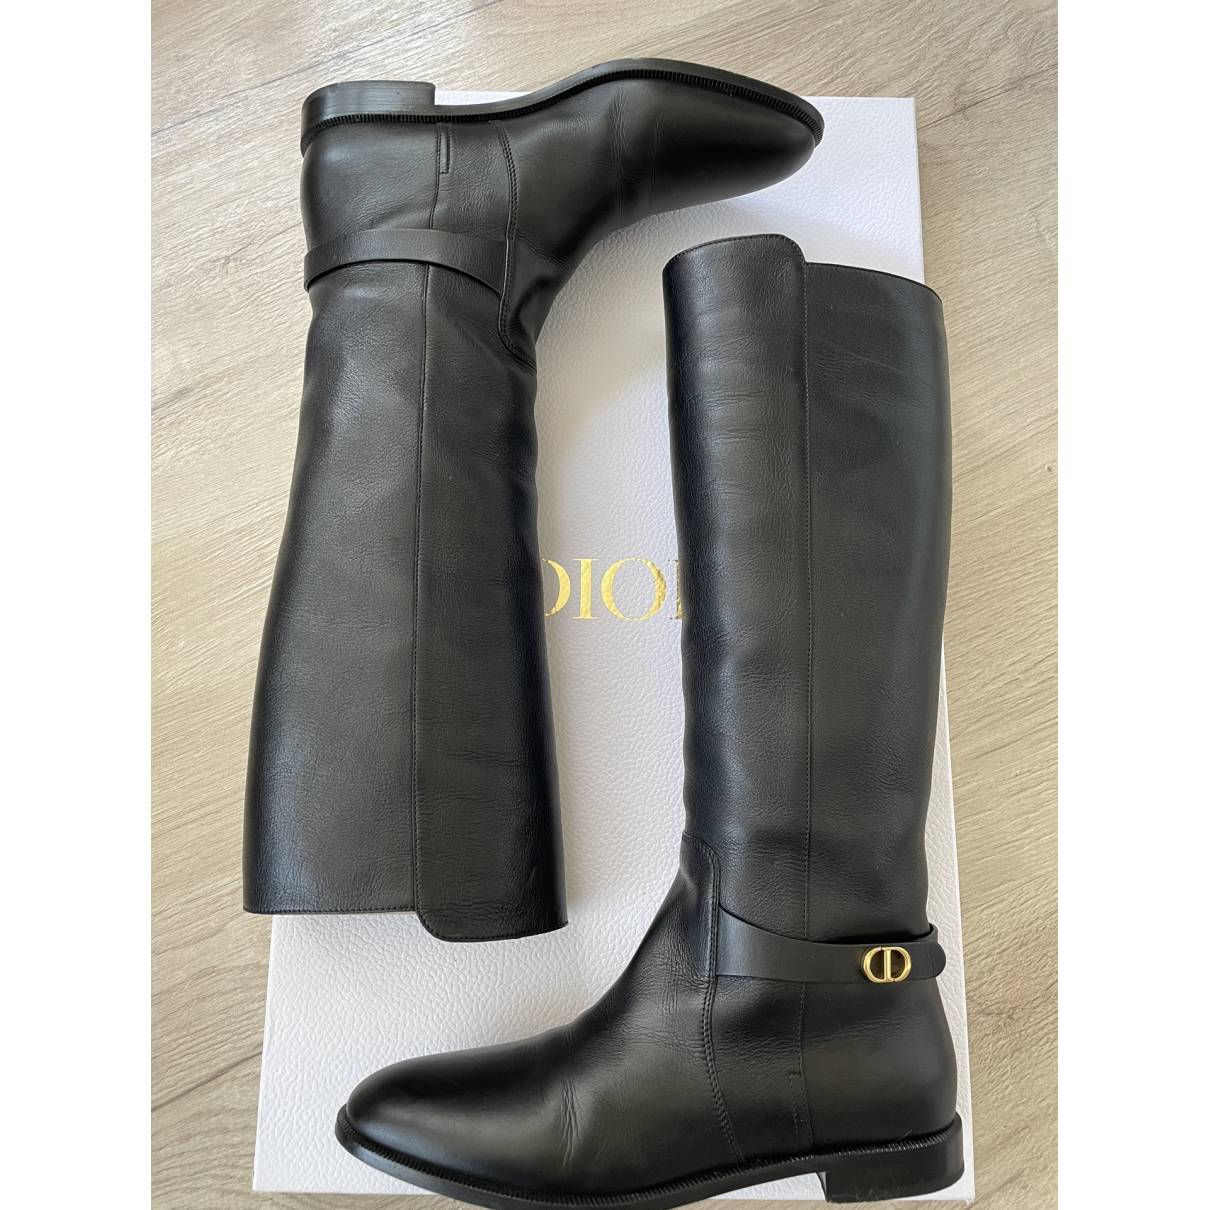 Dior empreinte leather riding boots Dior Black size 40 EU in Leather -  31407556